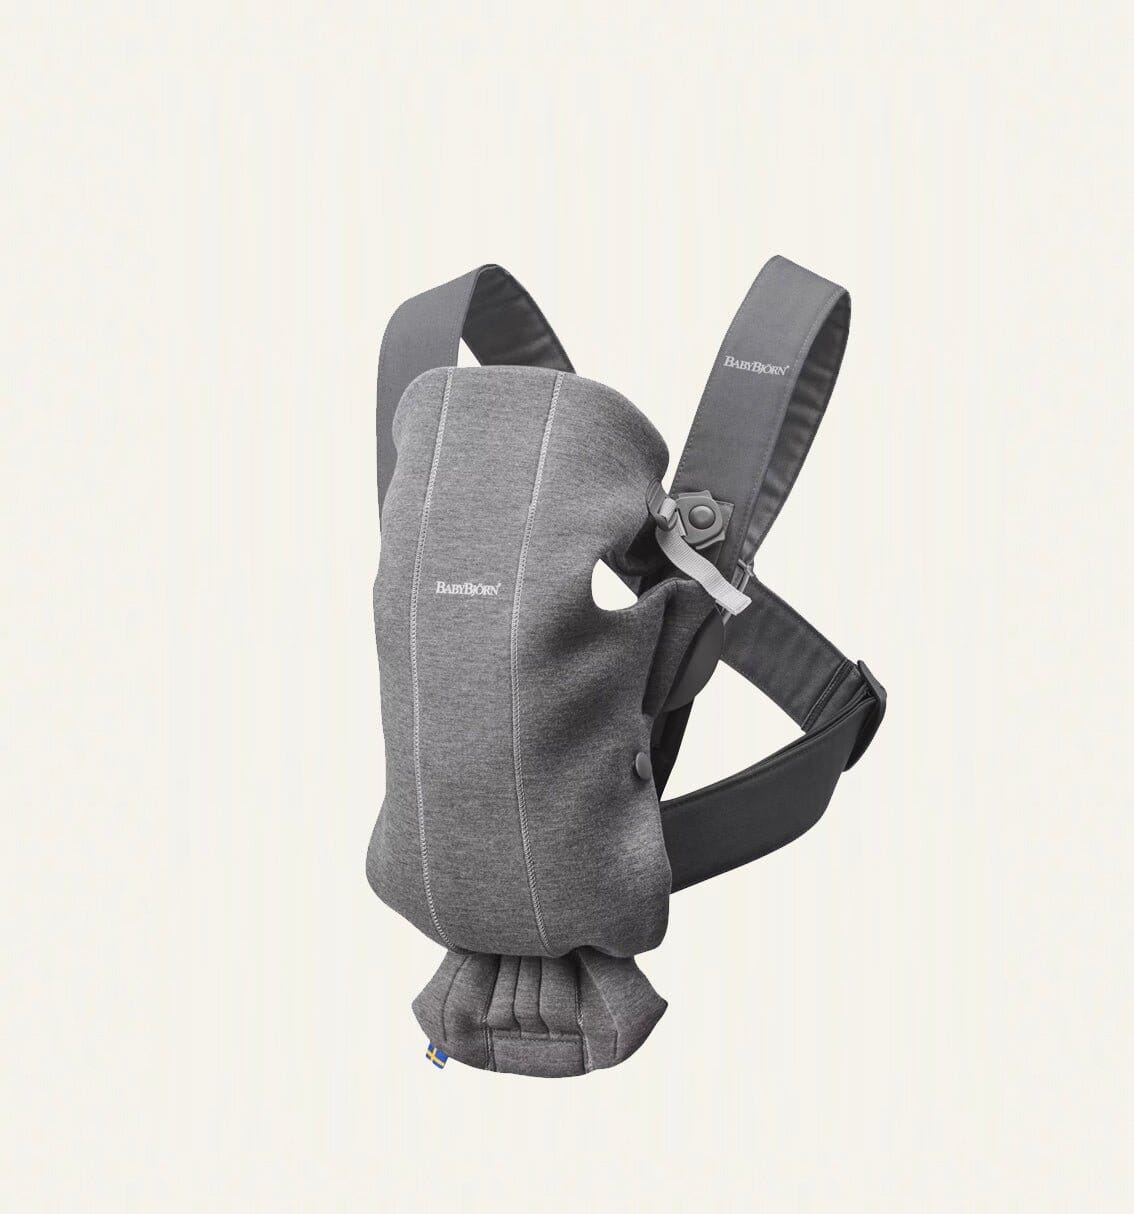 Babybjorn Mini Carrier available to rent from Baboodle from just £9 per month.